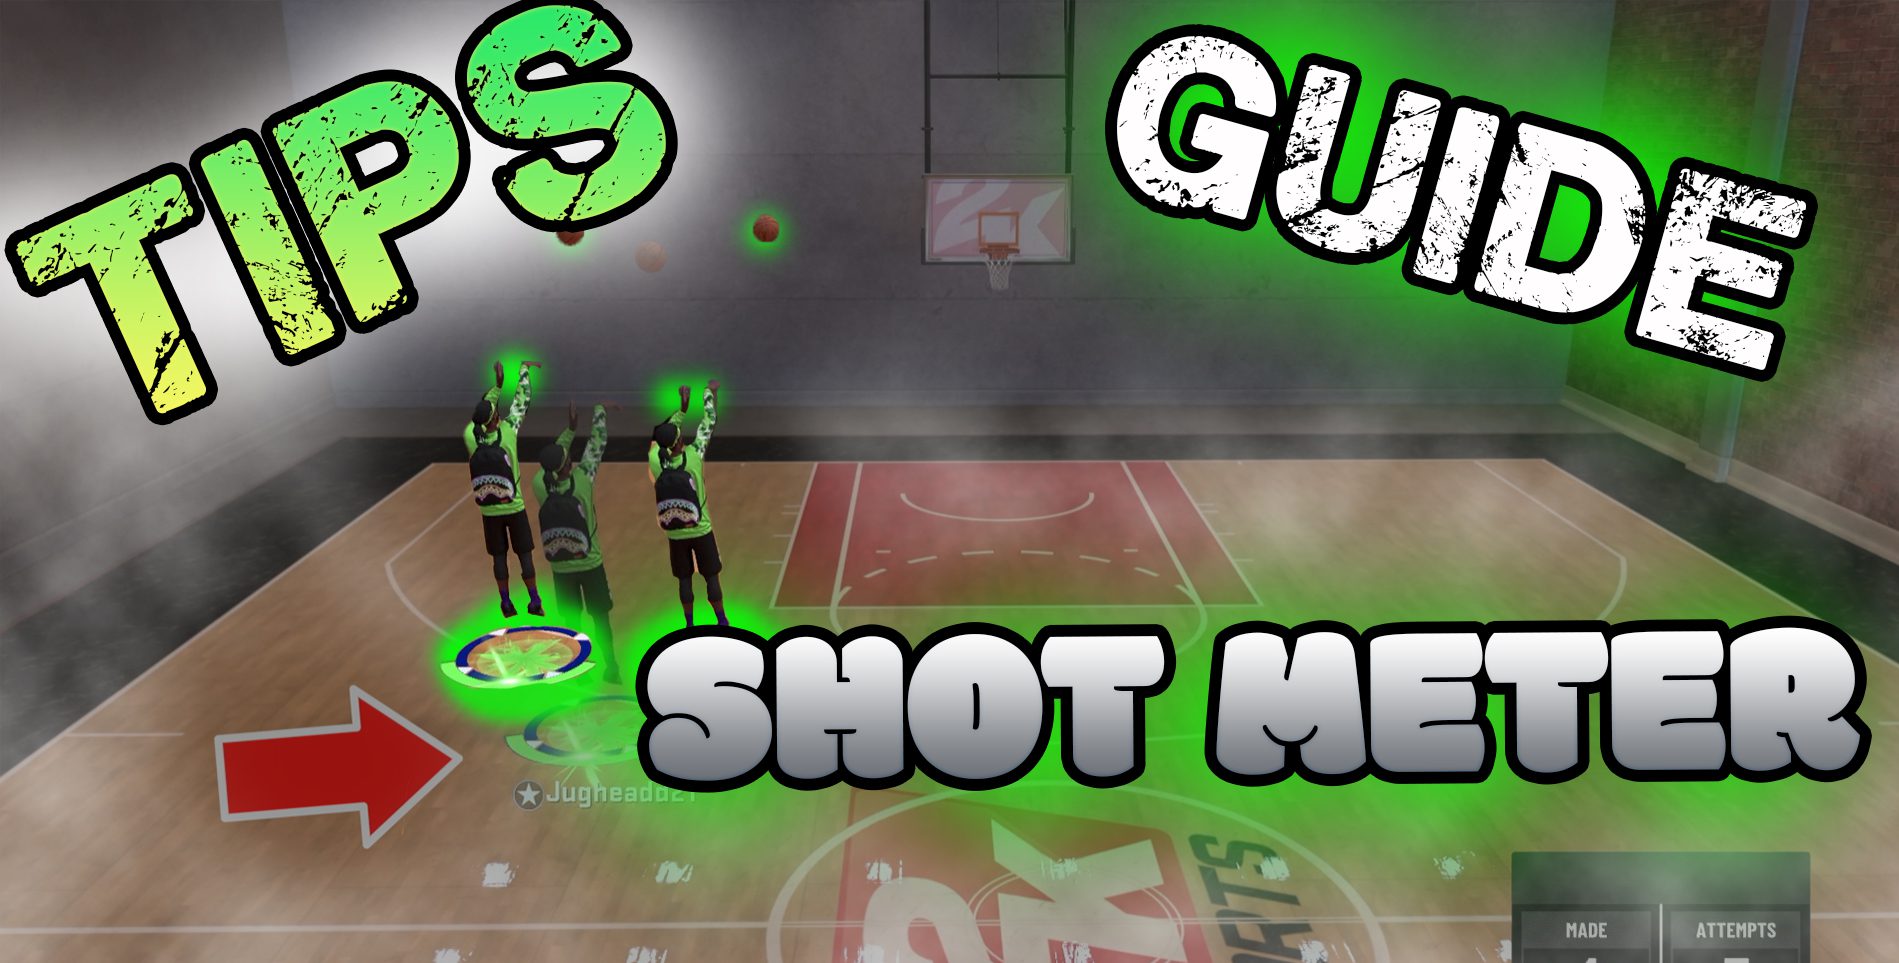 How to turn off the shot meter in NBA 2K20